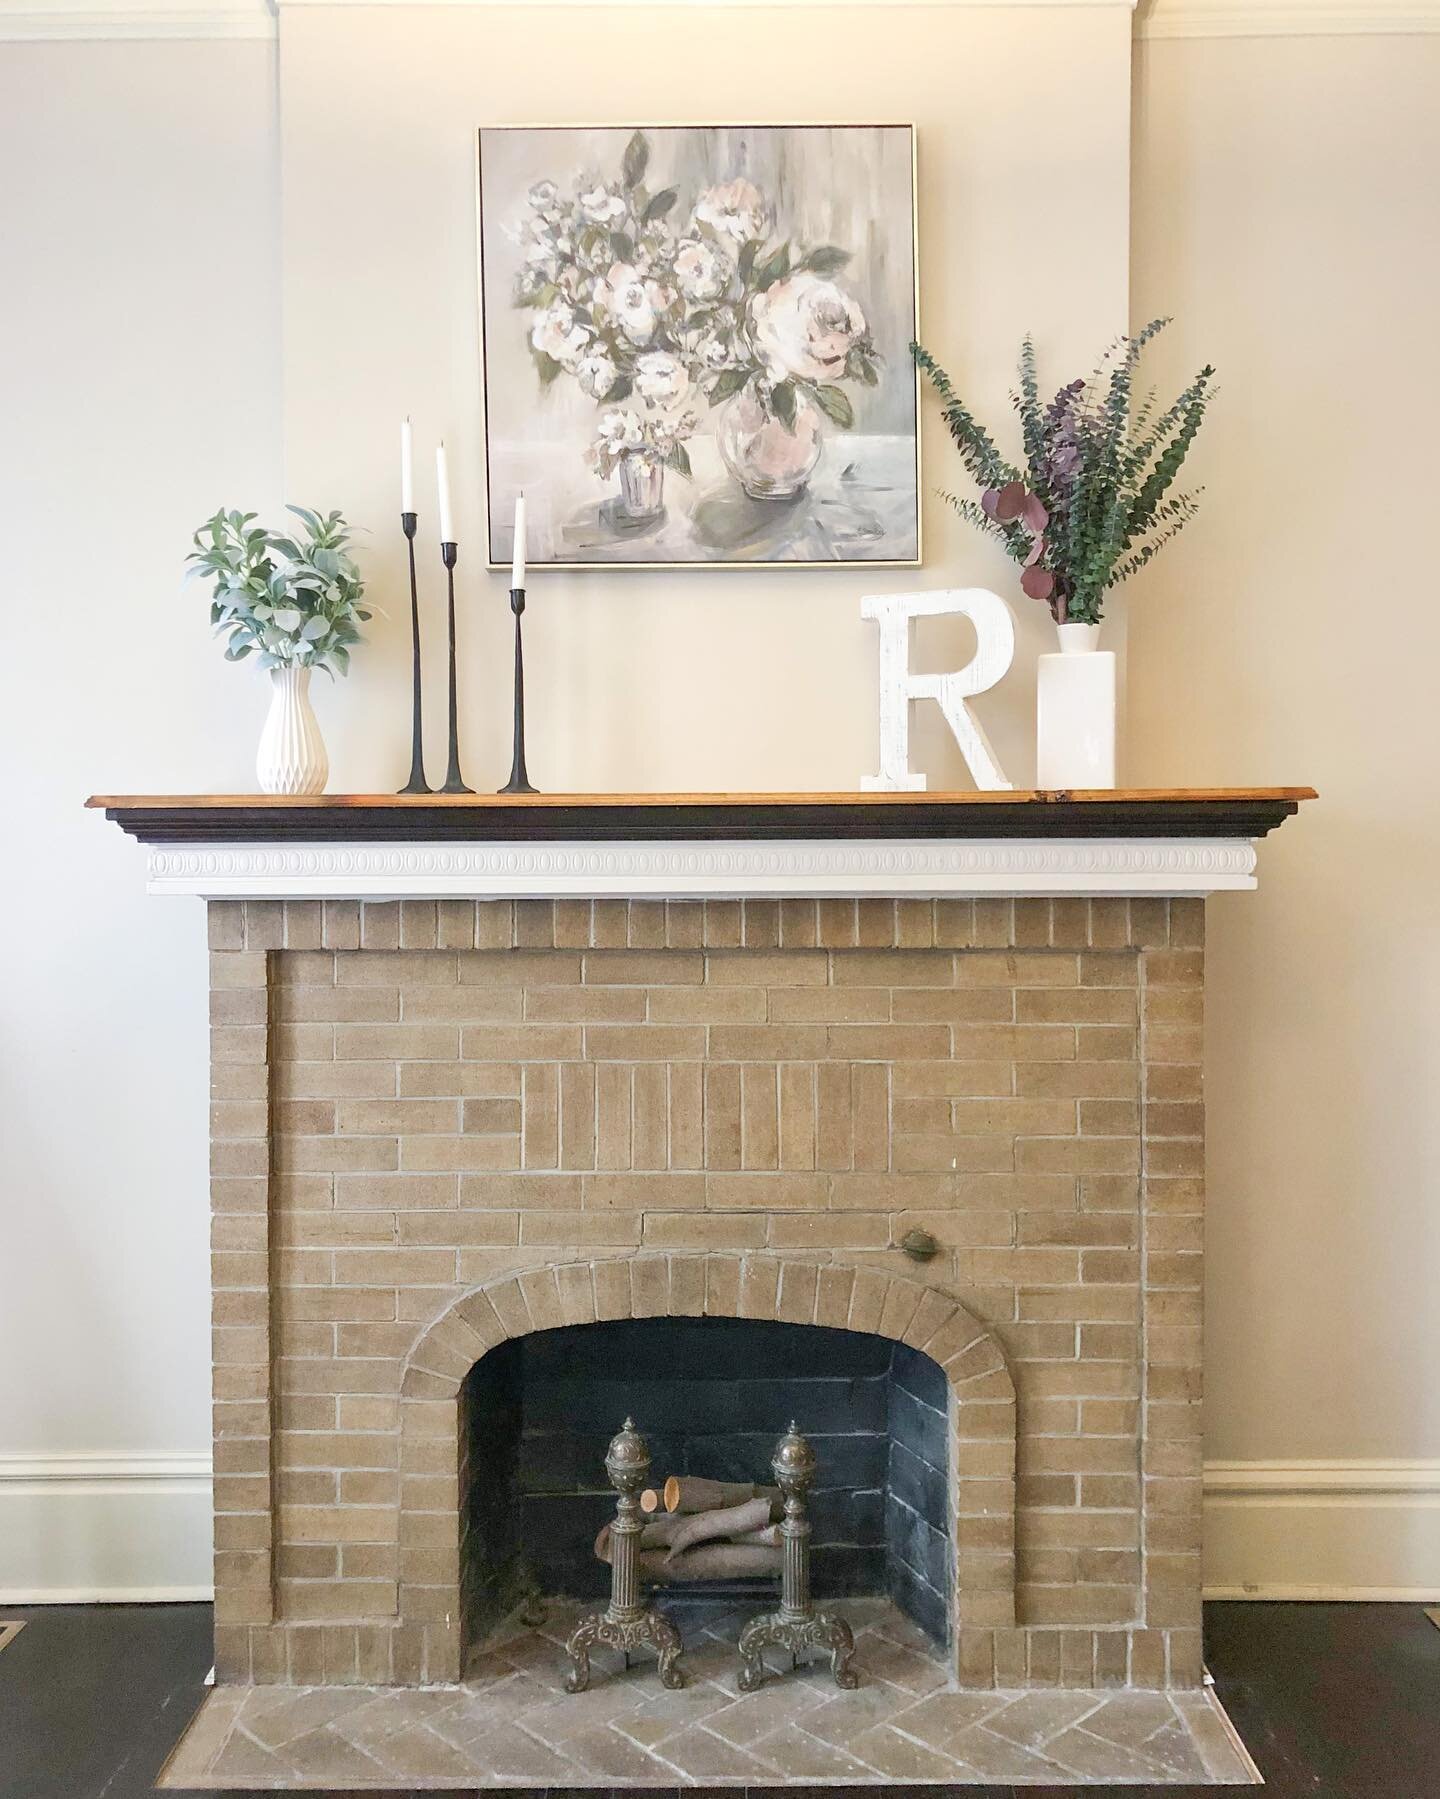 before &amp; after: fireplace edition

this fireplace was underutilized and underwhelming. the additional weird tile hearth distracted from the gorgeous brick. we removed that eyesore, gave the room a fresh coat of paint, and added minimal decor to t